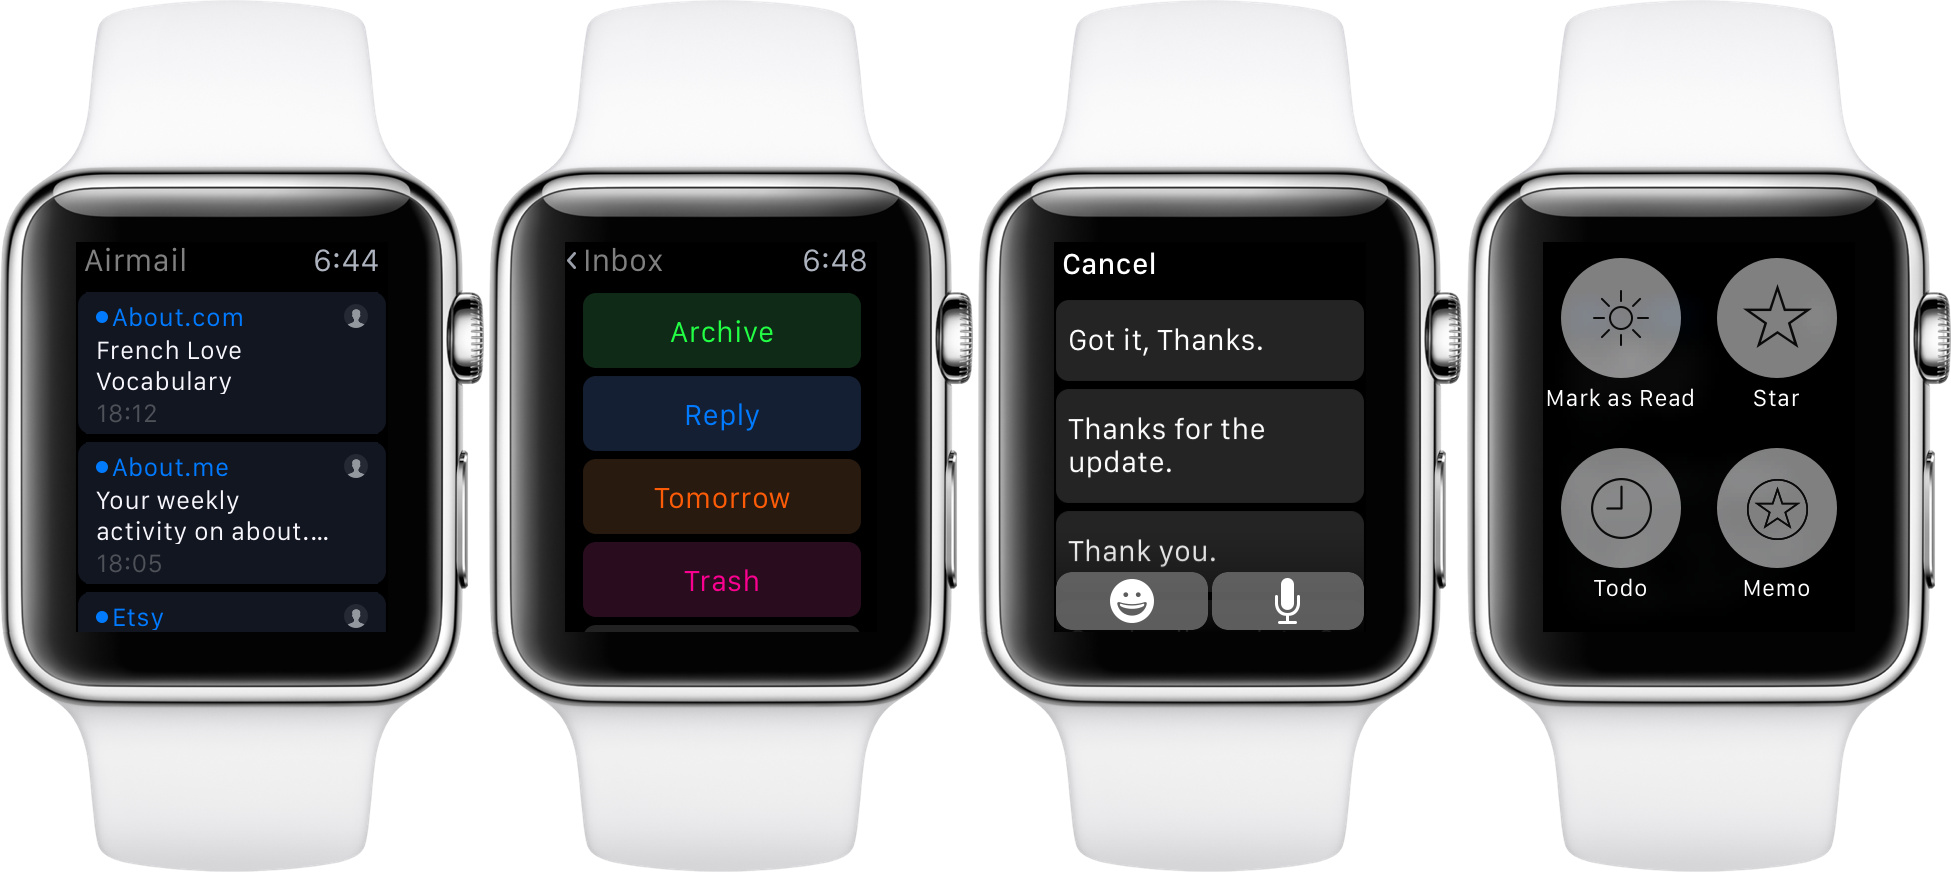 AirMail could be the best email client for Apple Watch